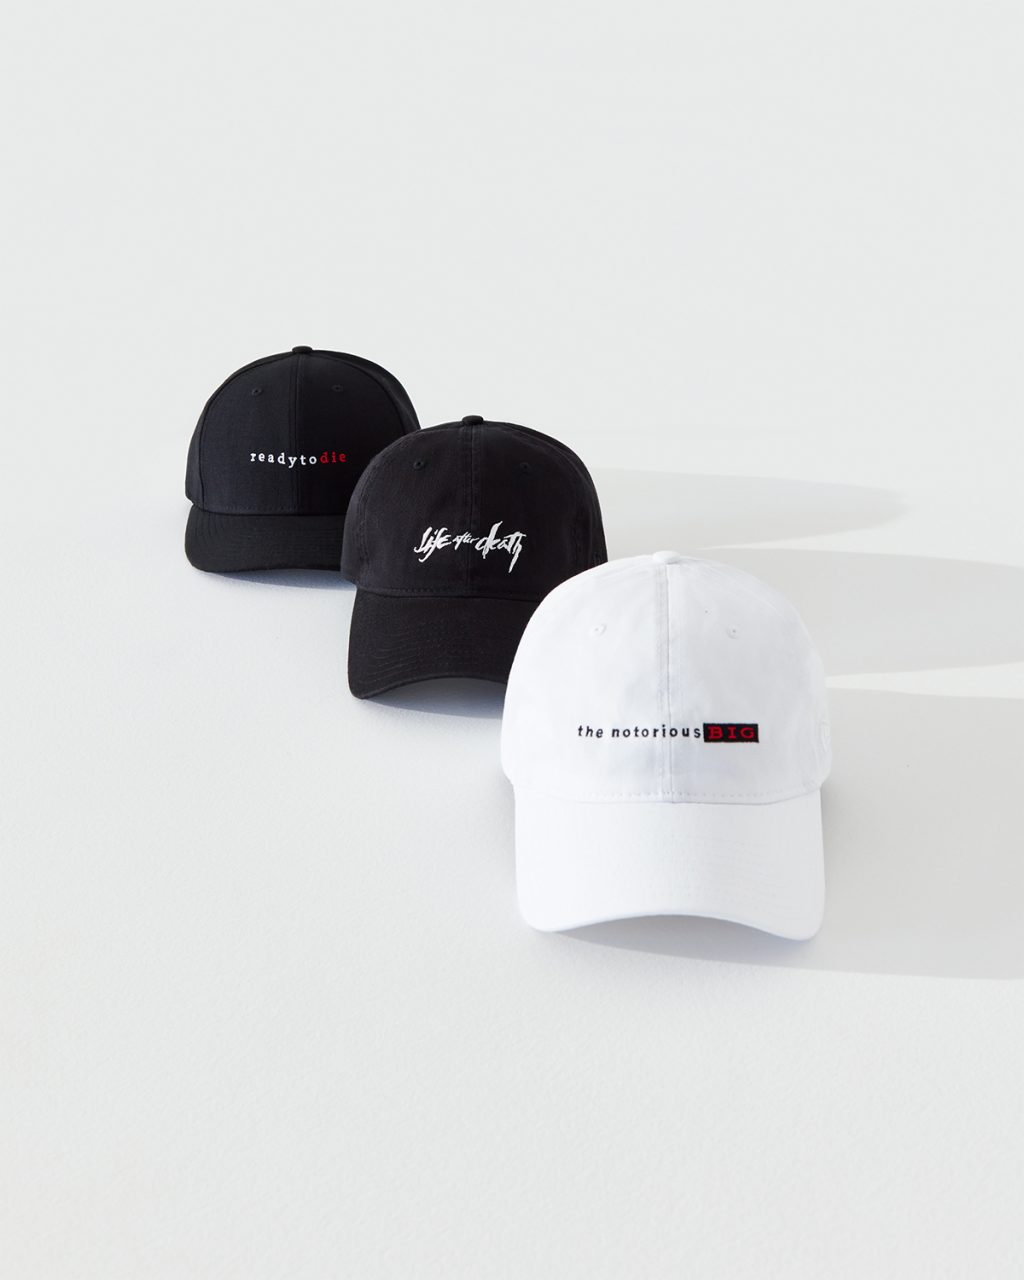 KITH for The Notorious B.I.G.が3月12日にドロップ